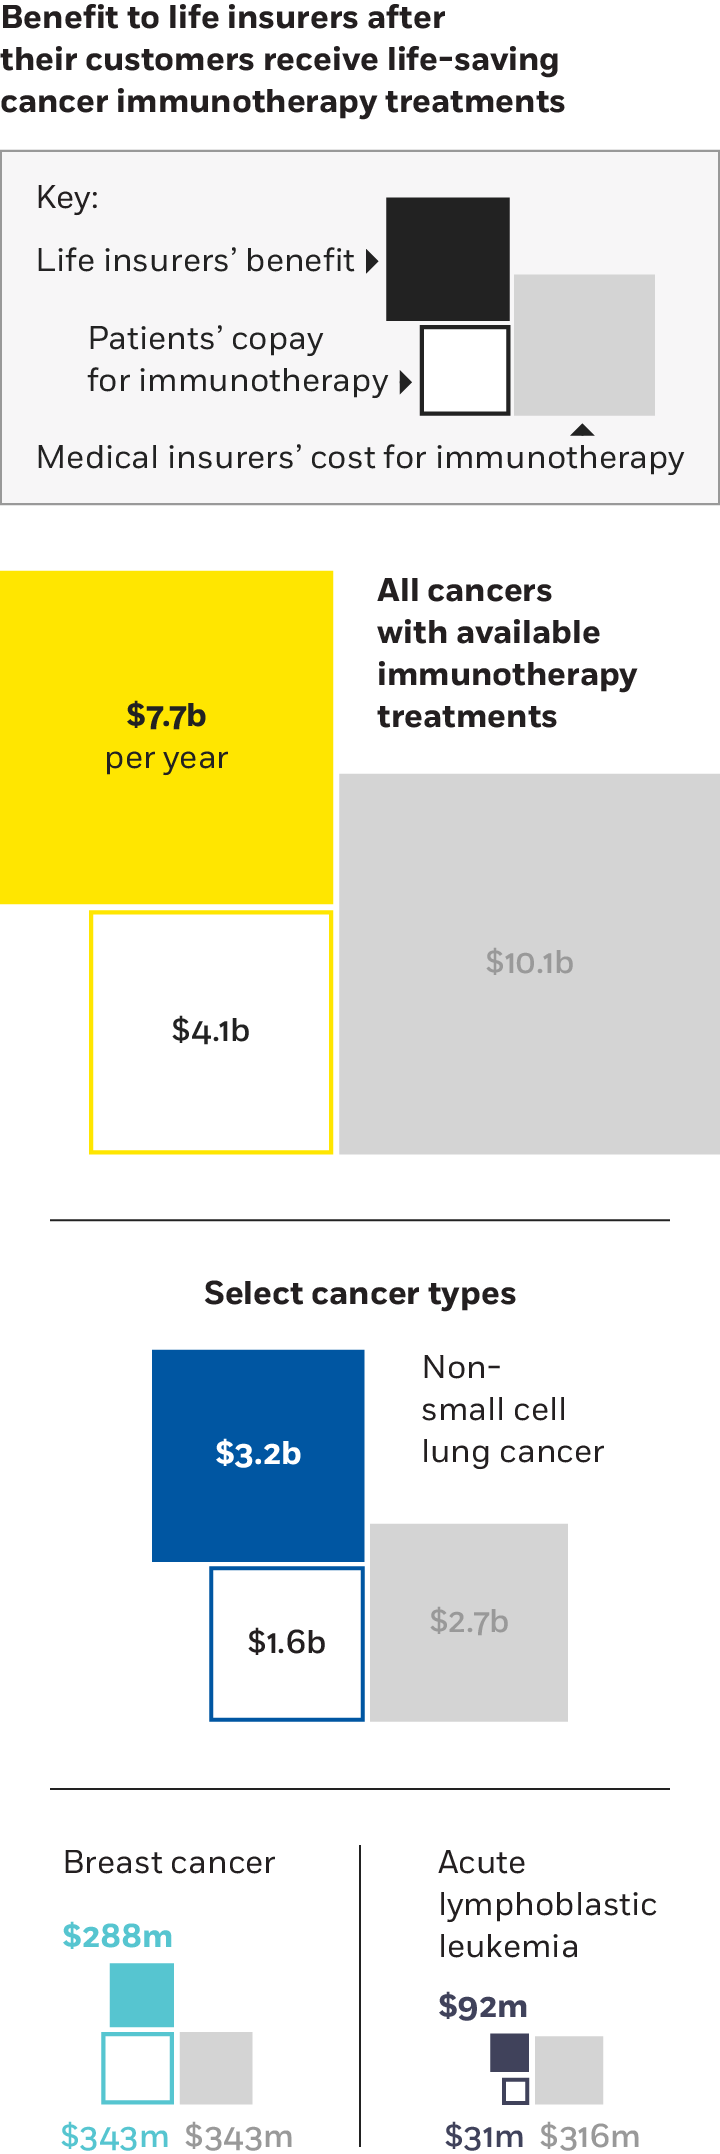 Benefit to life insurers after their customers receive life-saving cancer immunotherapy treatments chart